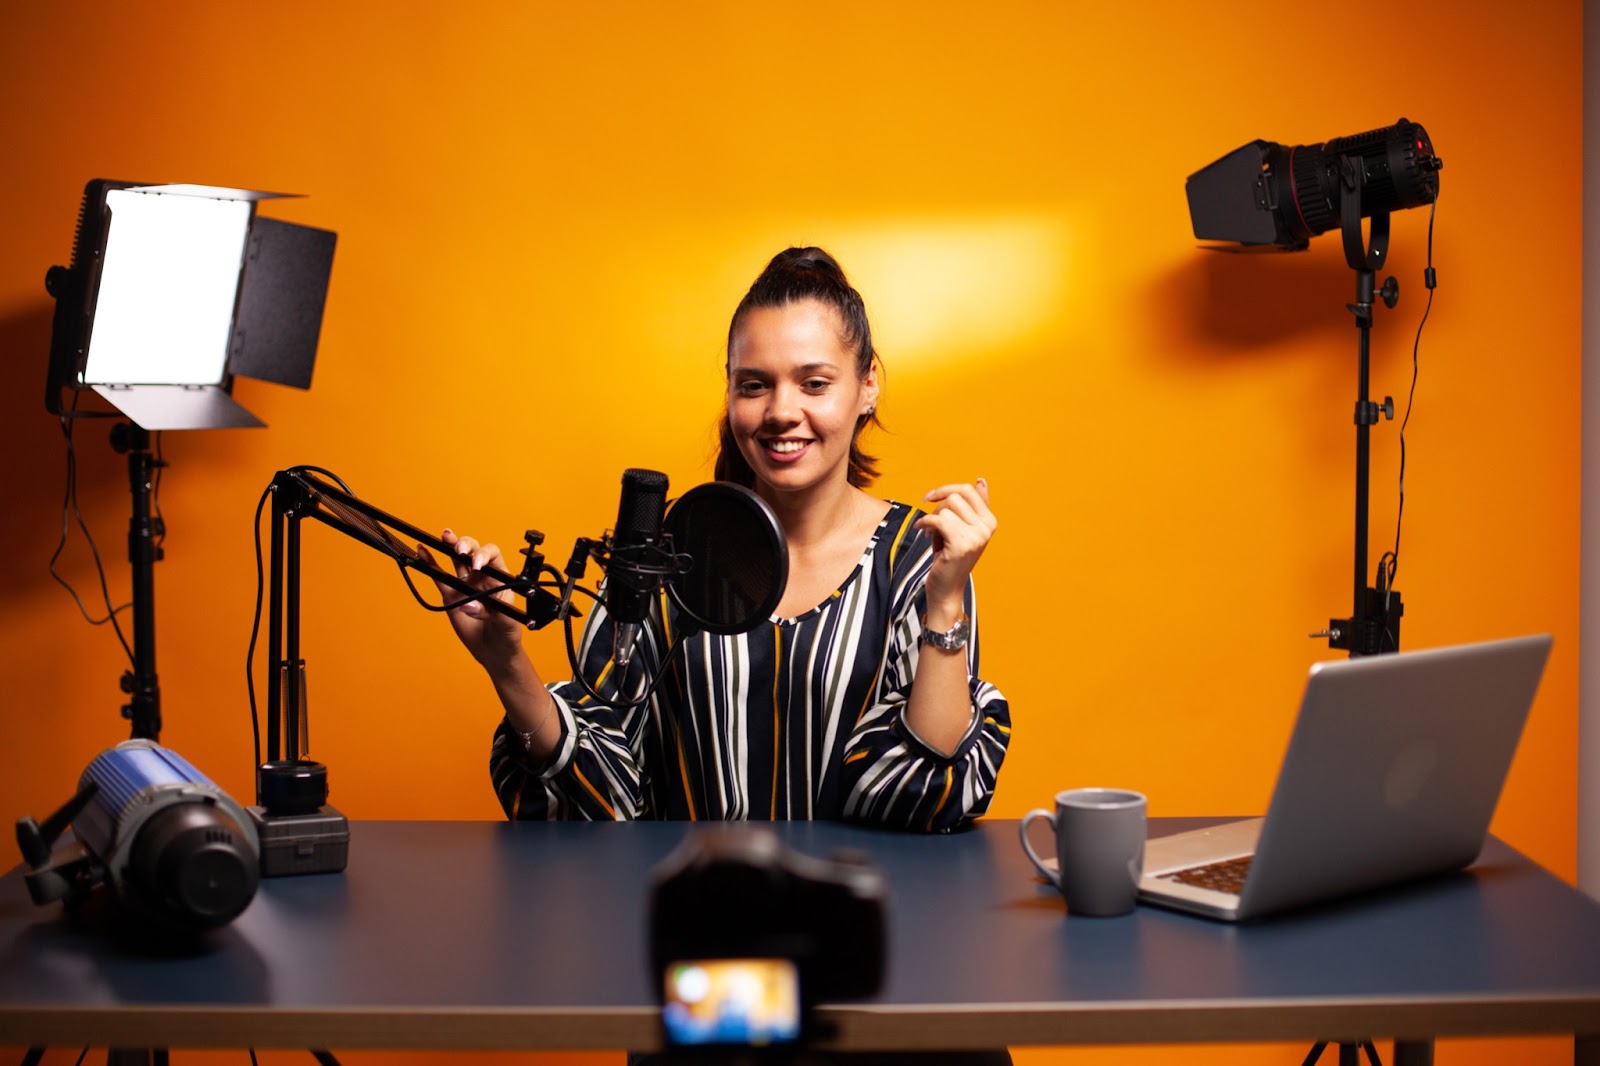 Content creator in home studio with microphone and lamps